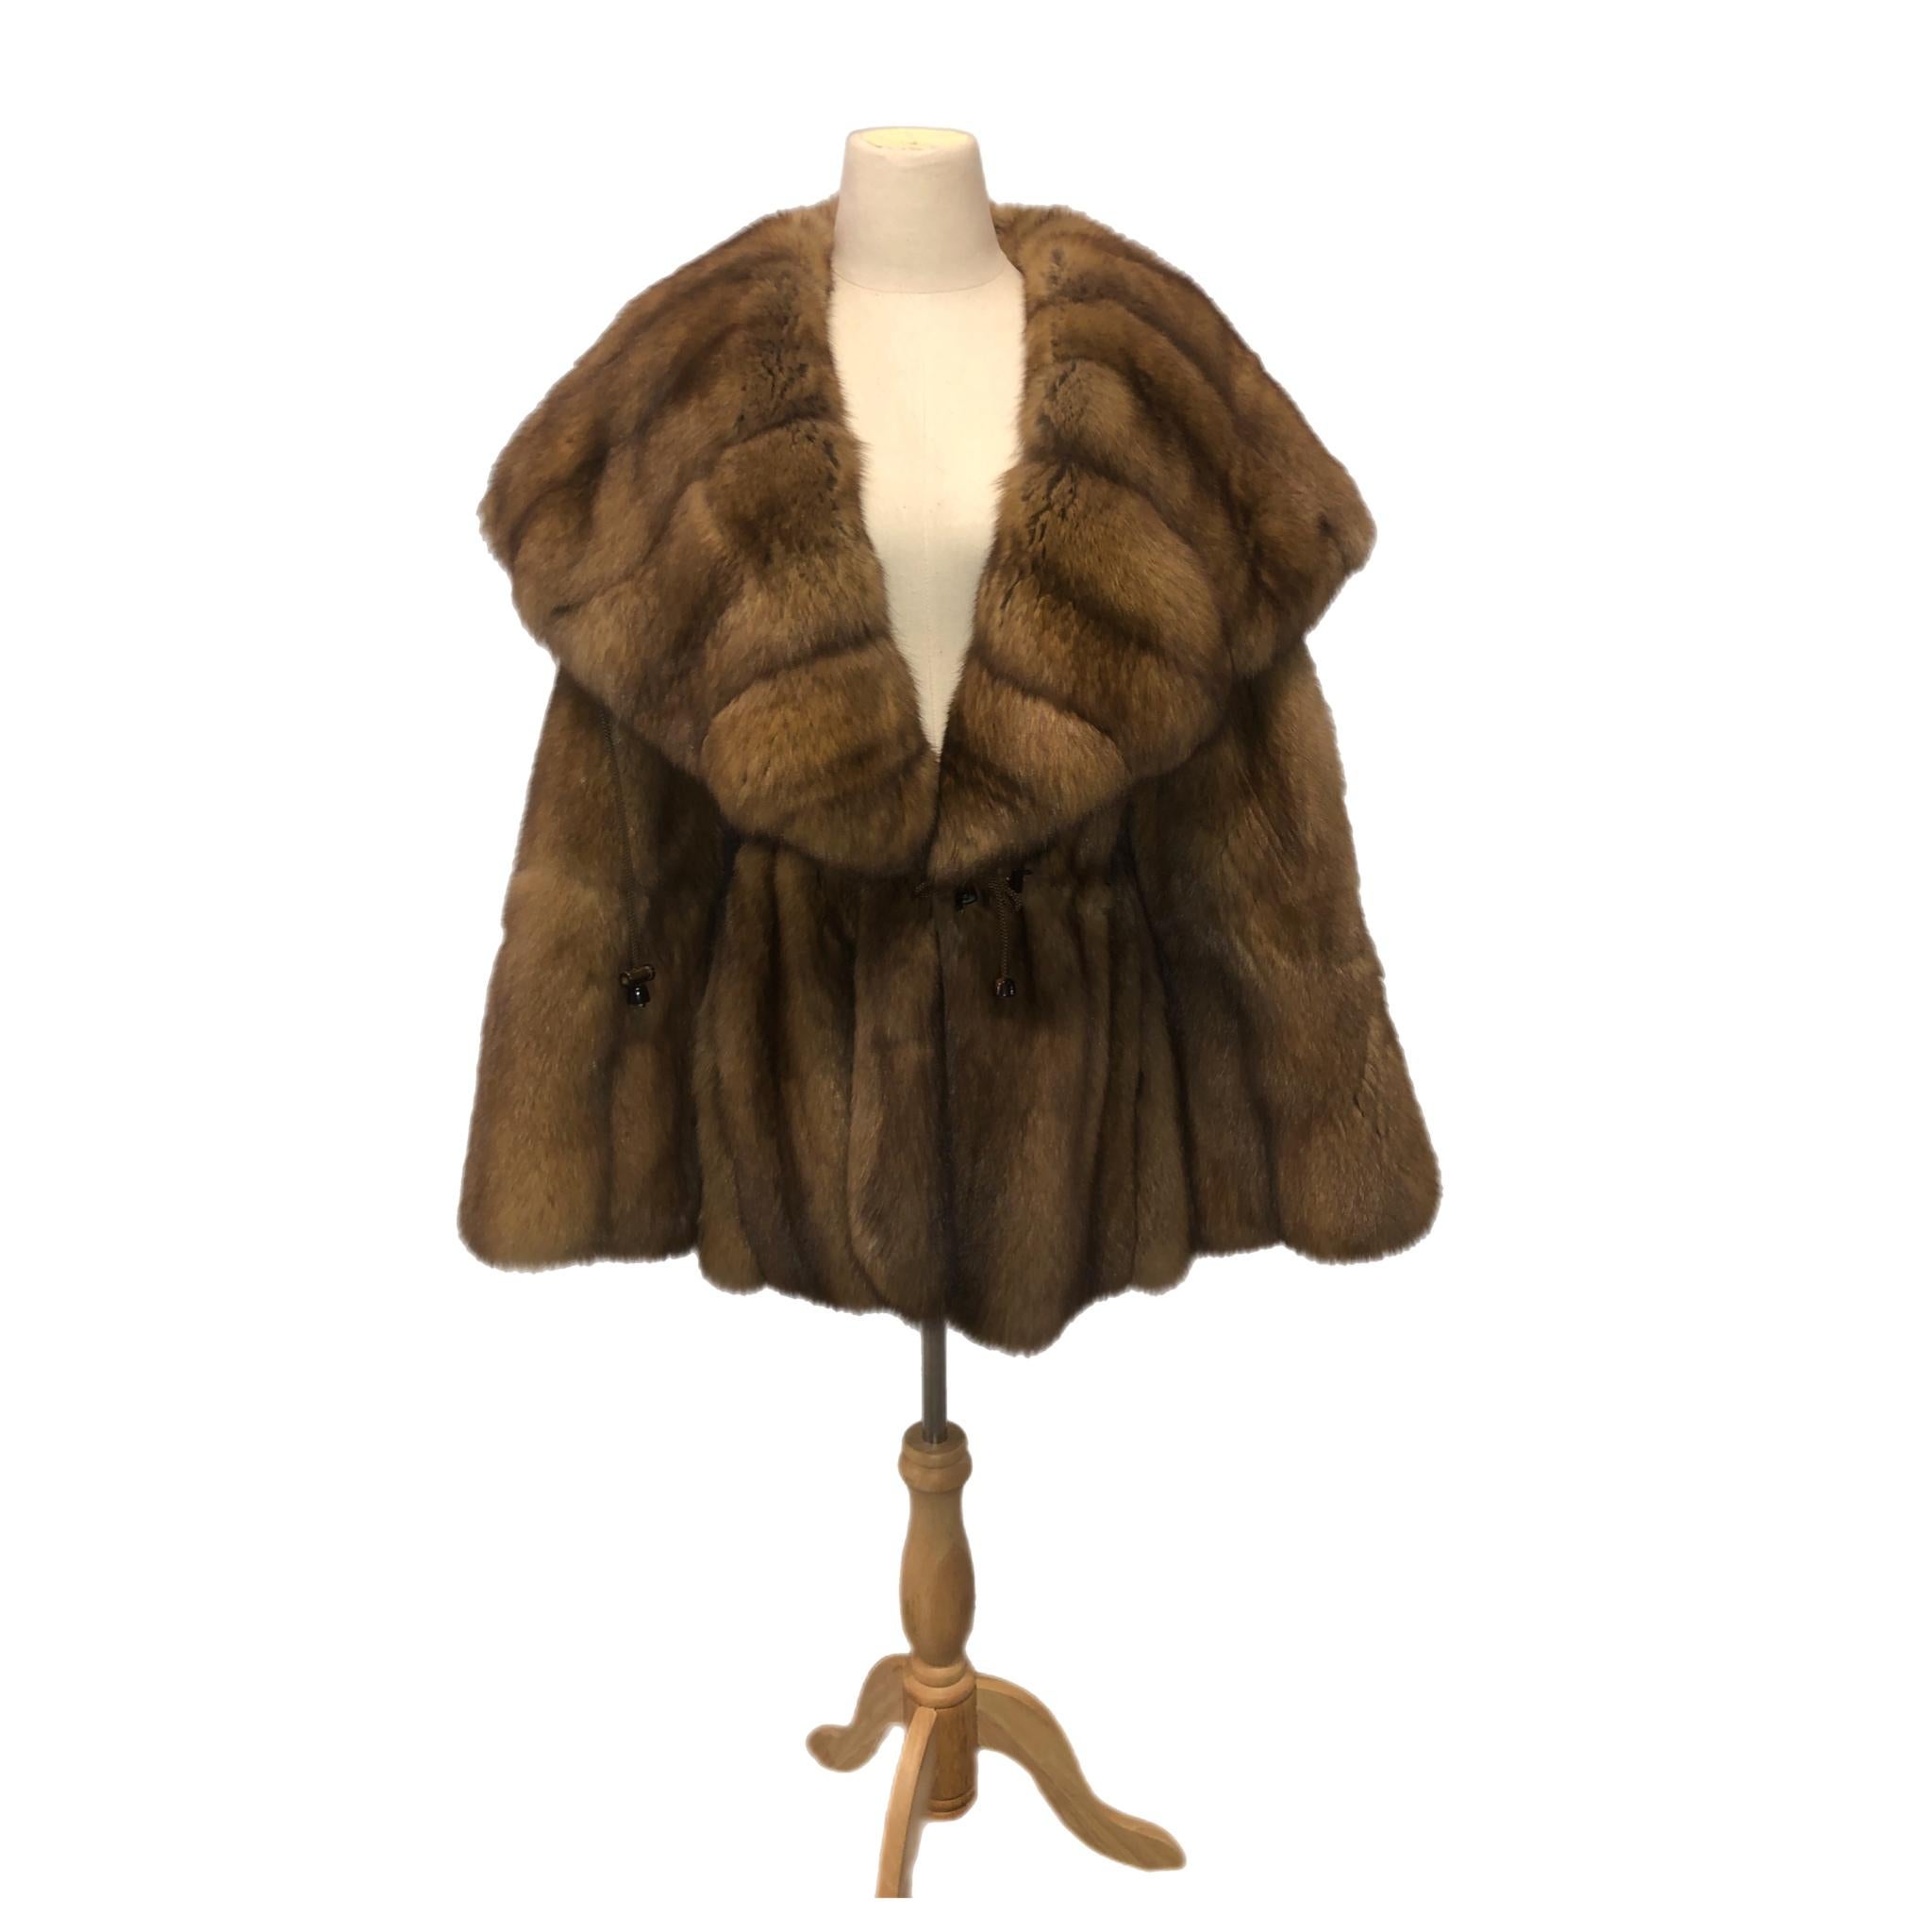 Bisang Russian Sable fur coat size 14-16 tags 65000$ For Sale 2